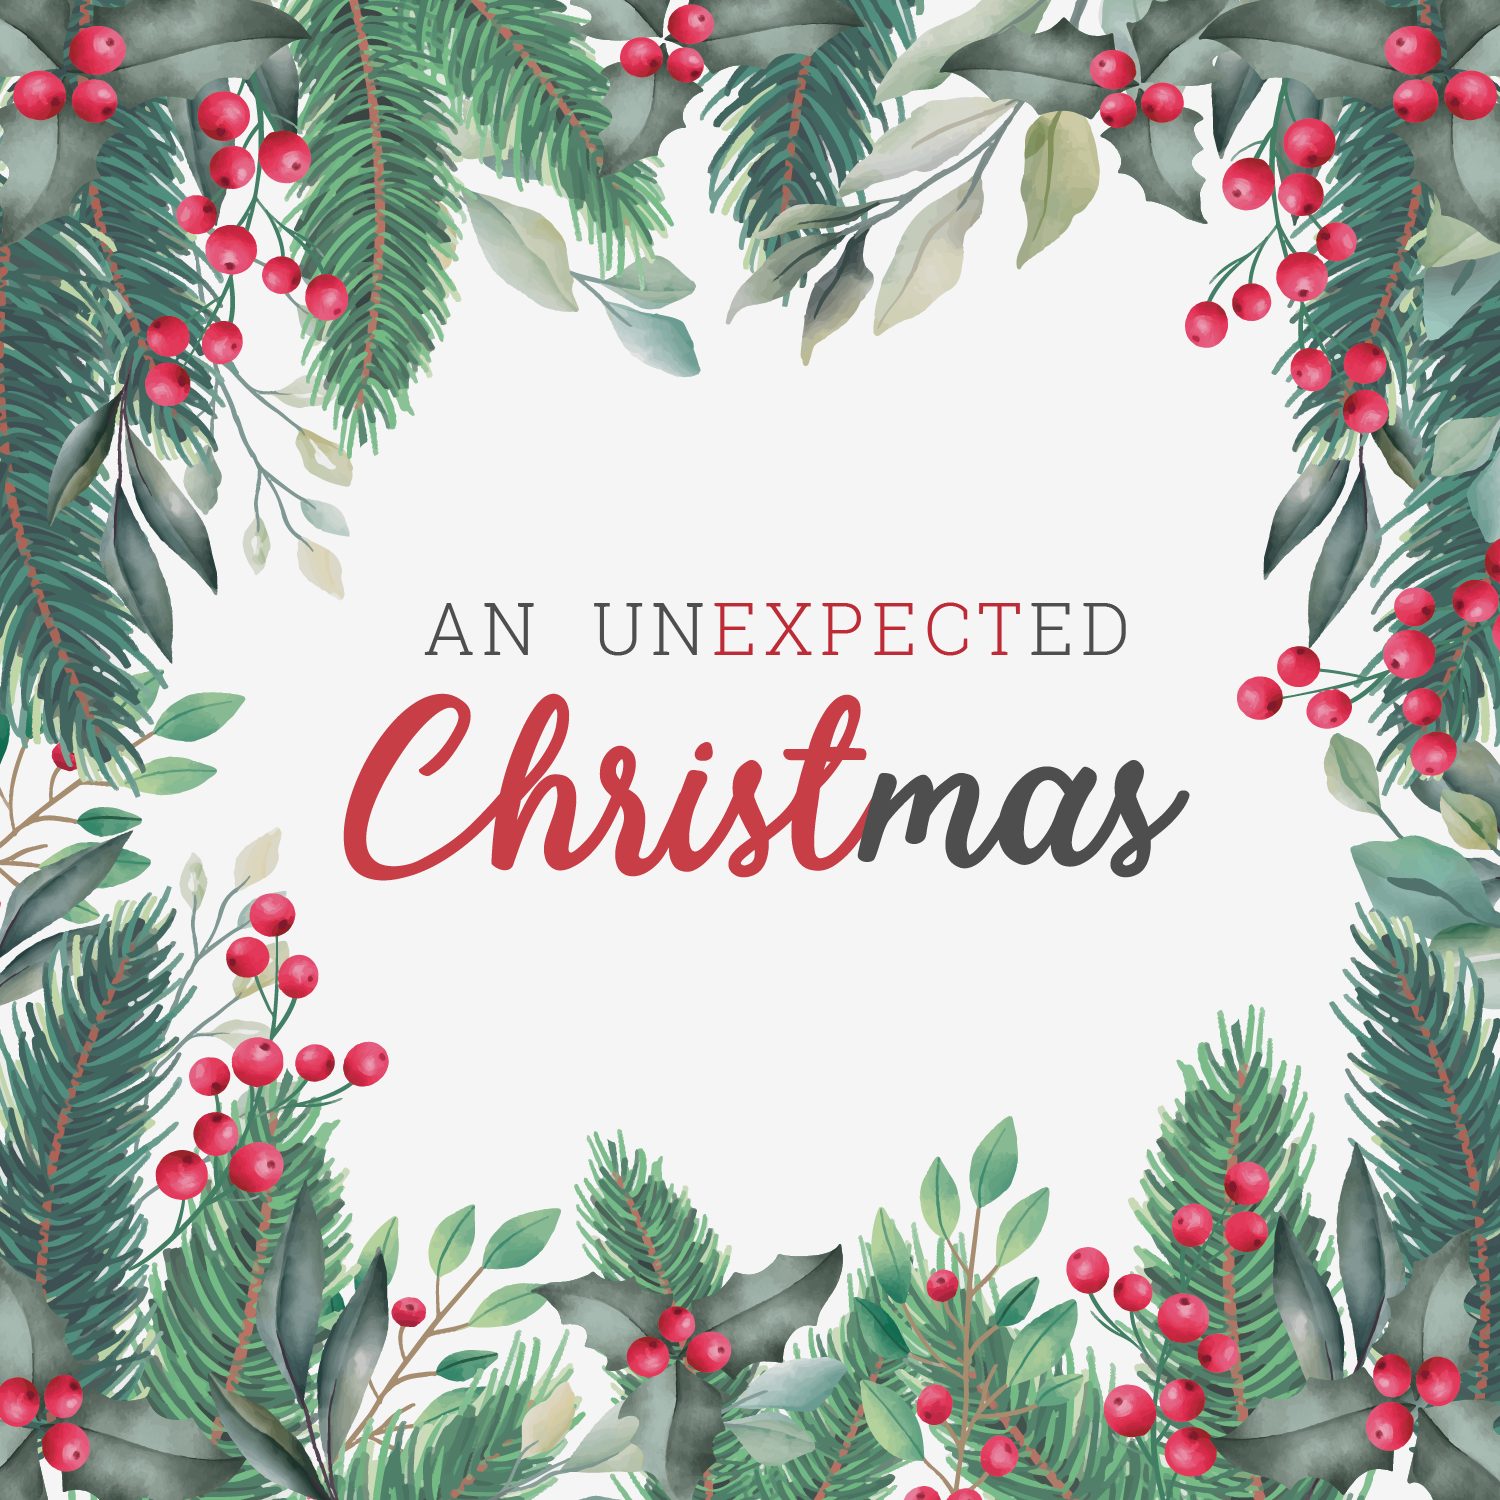 Unexpected Christmas: Episode 4 – Unexpected Message